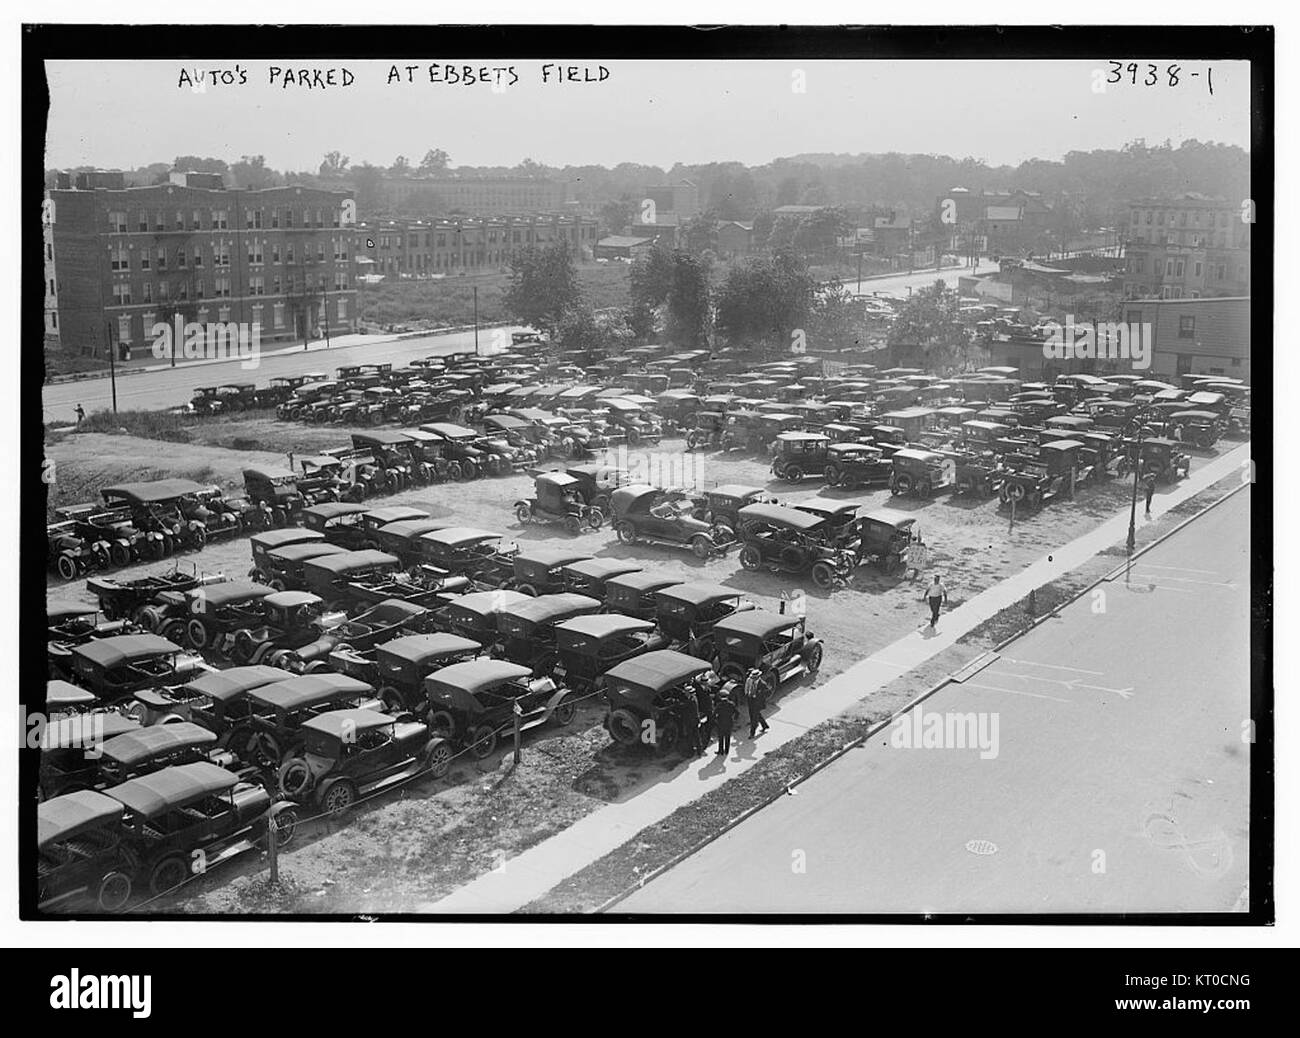 Auto's parked at Ebbets Field  (14174069390) Stock Photo